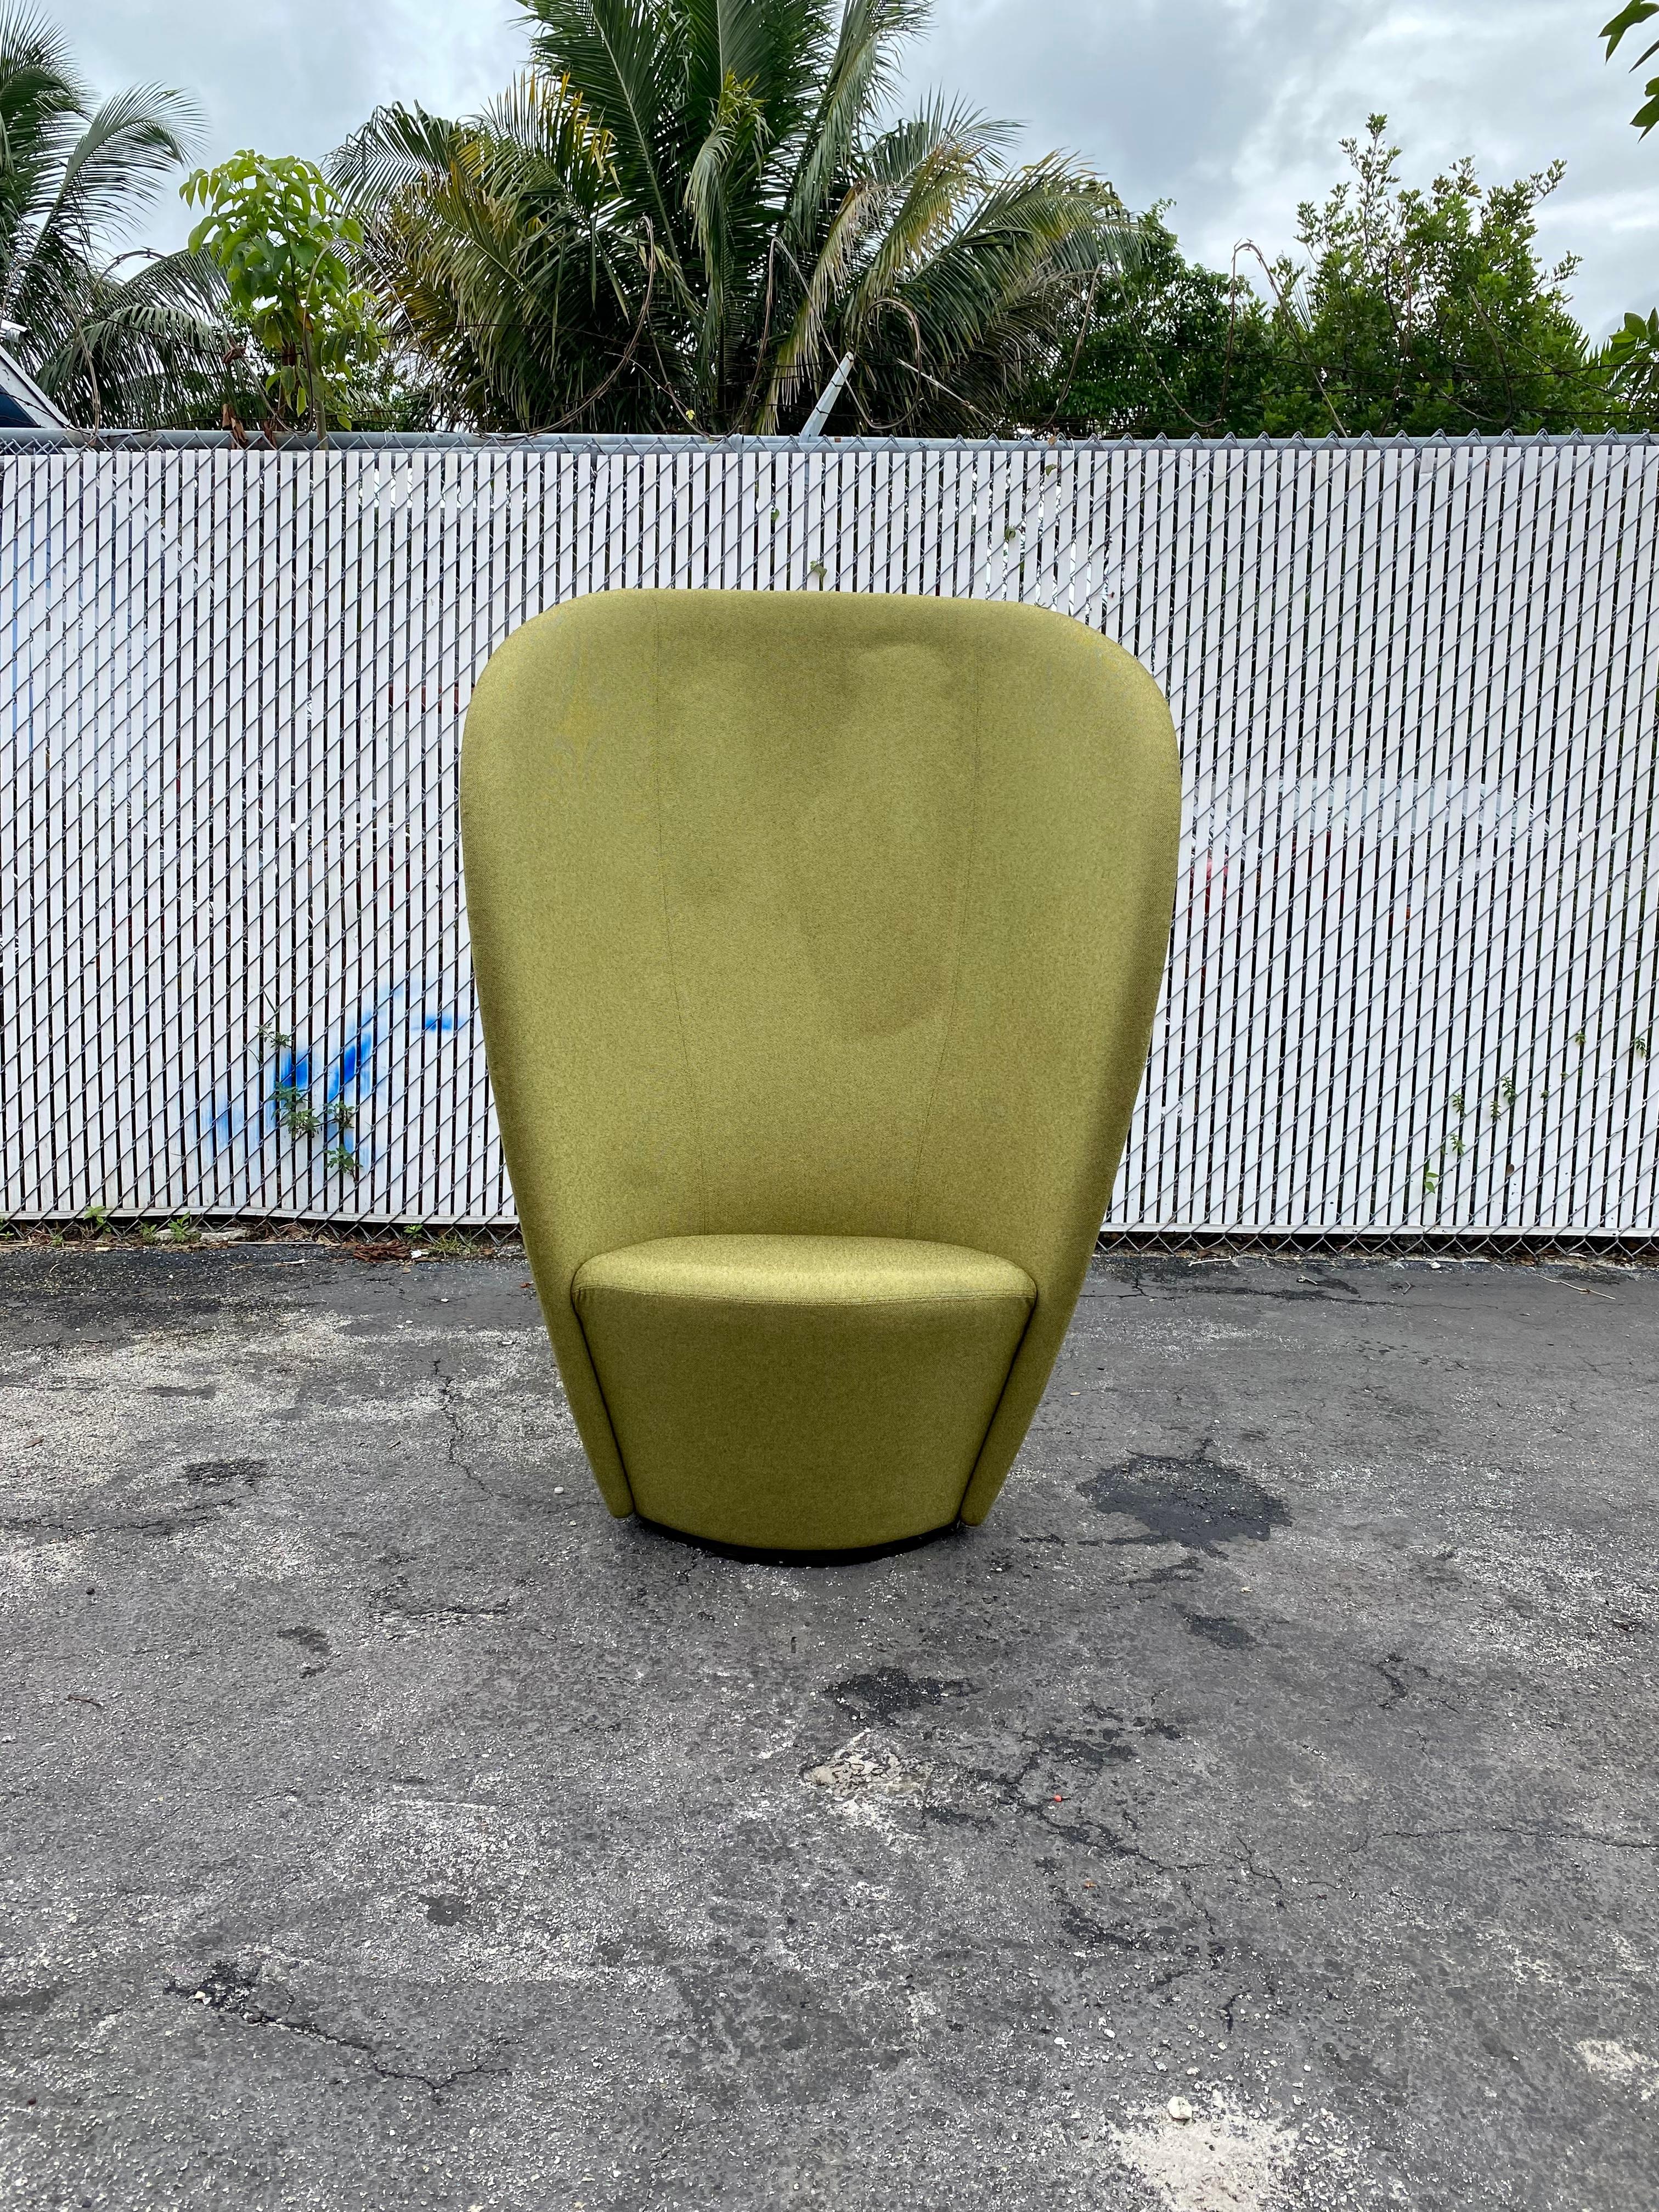 On offer on this occasion is one of the most stunning swivel chair you could hope to find. This is an ultra-rare opportunity to acquire what is, unequivocally, the best of the best, it being a most spectacular and beautifully-presented sectional.